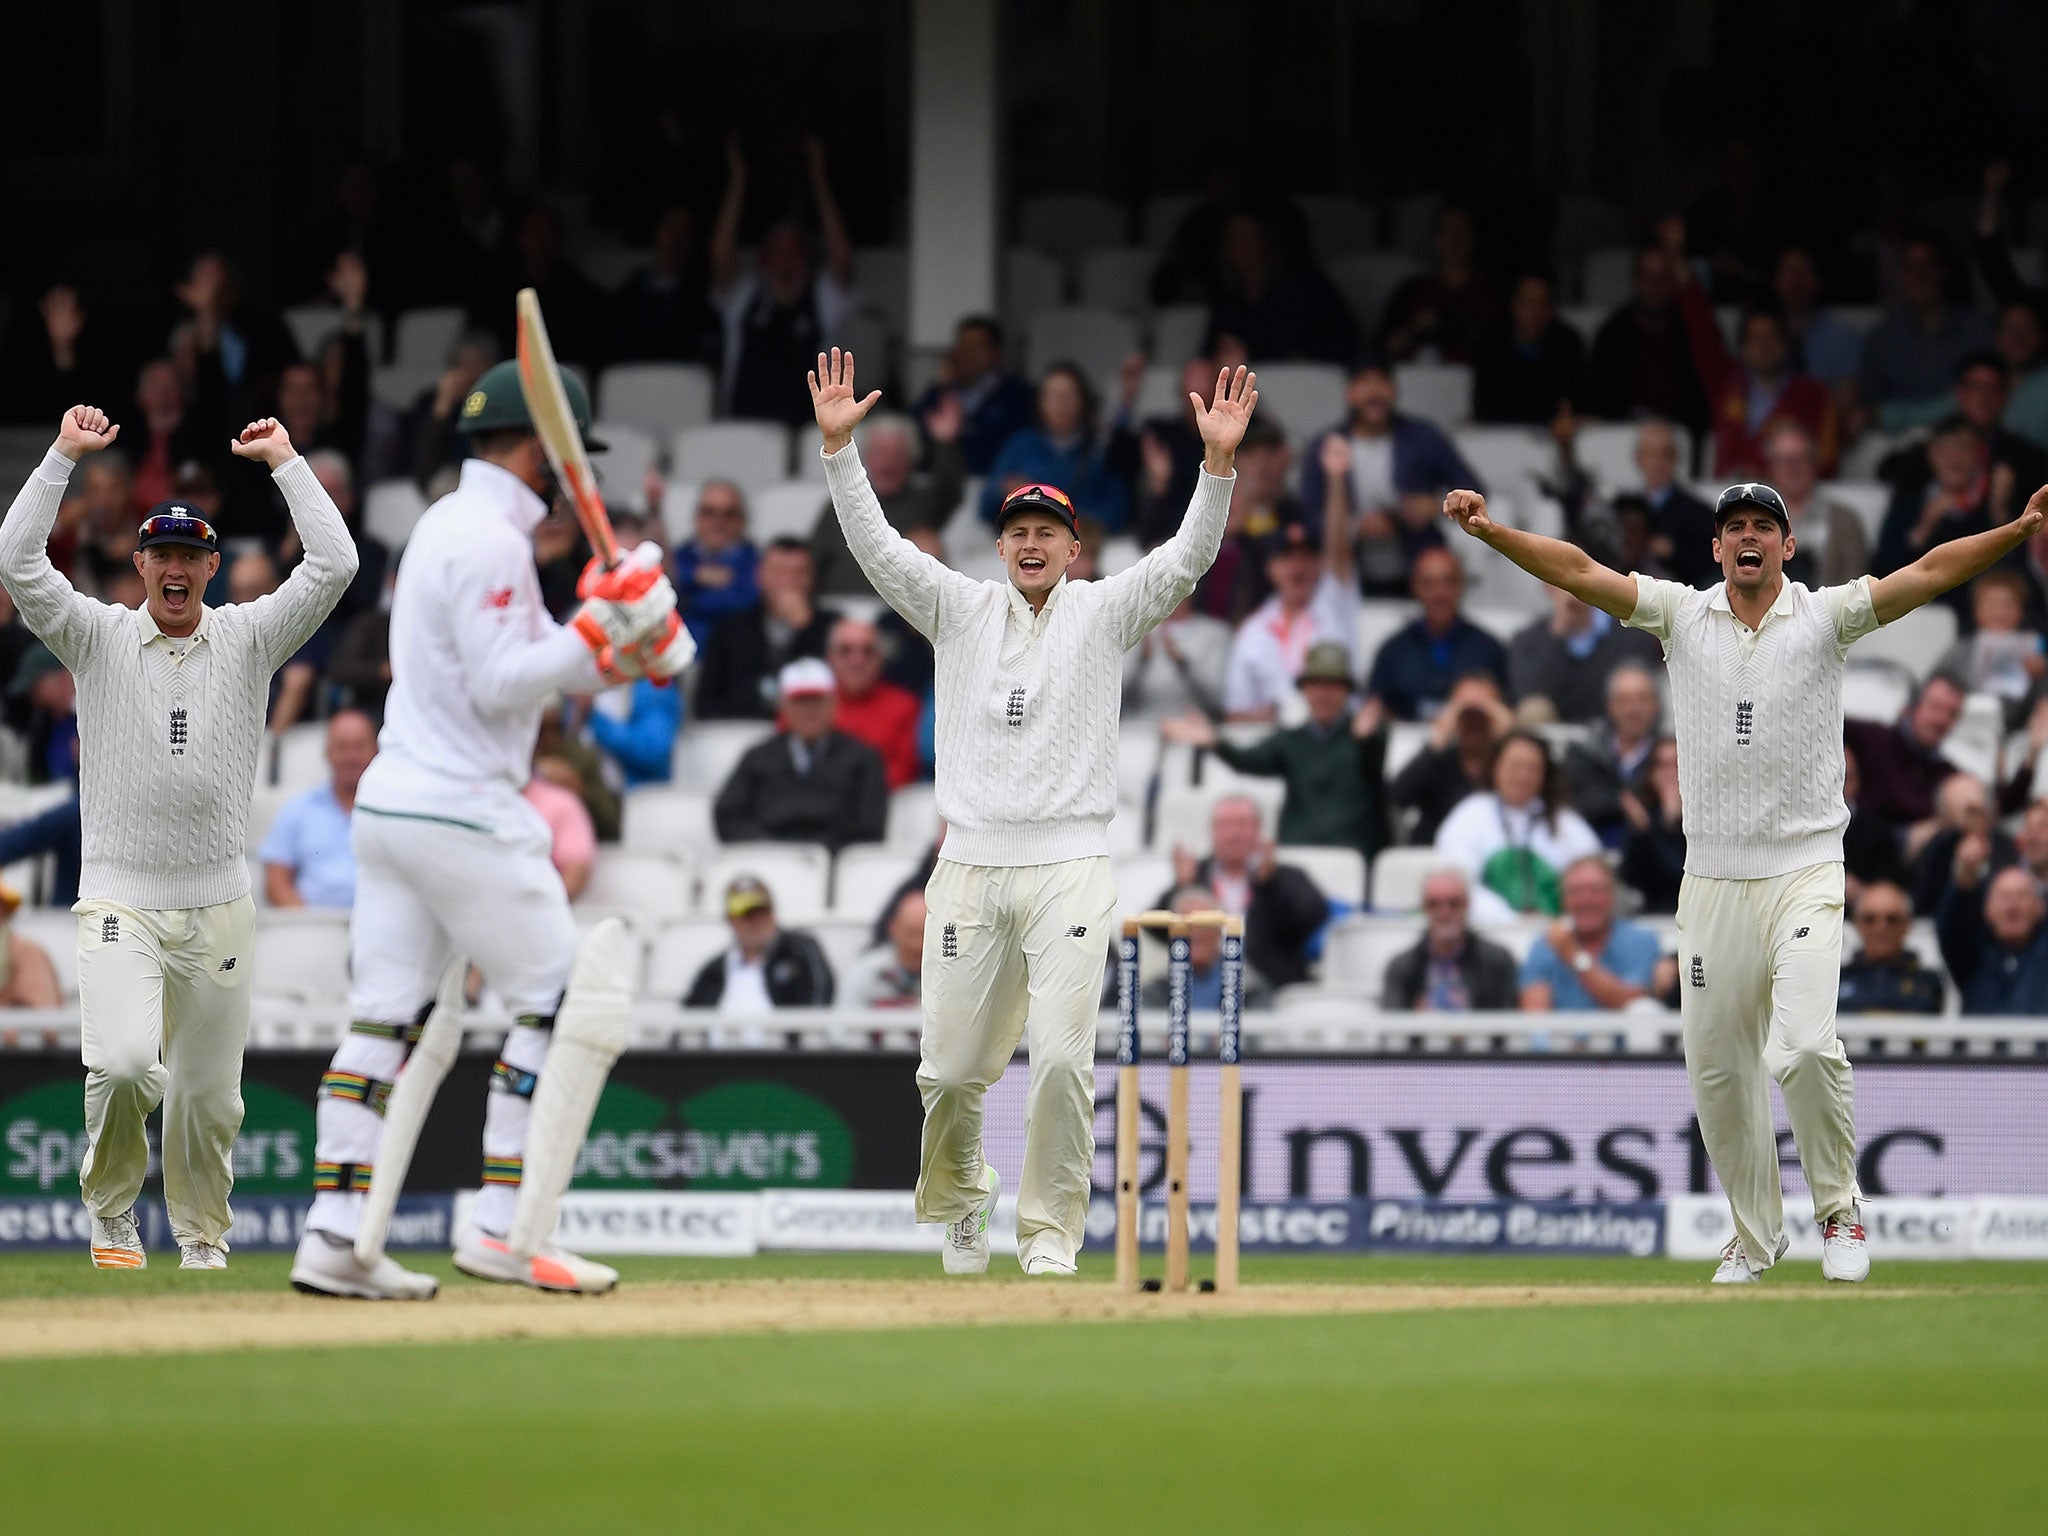 England celebrate taking the wicket of Heino Kuhn on day three